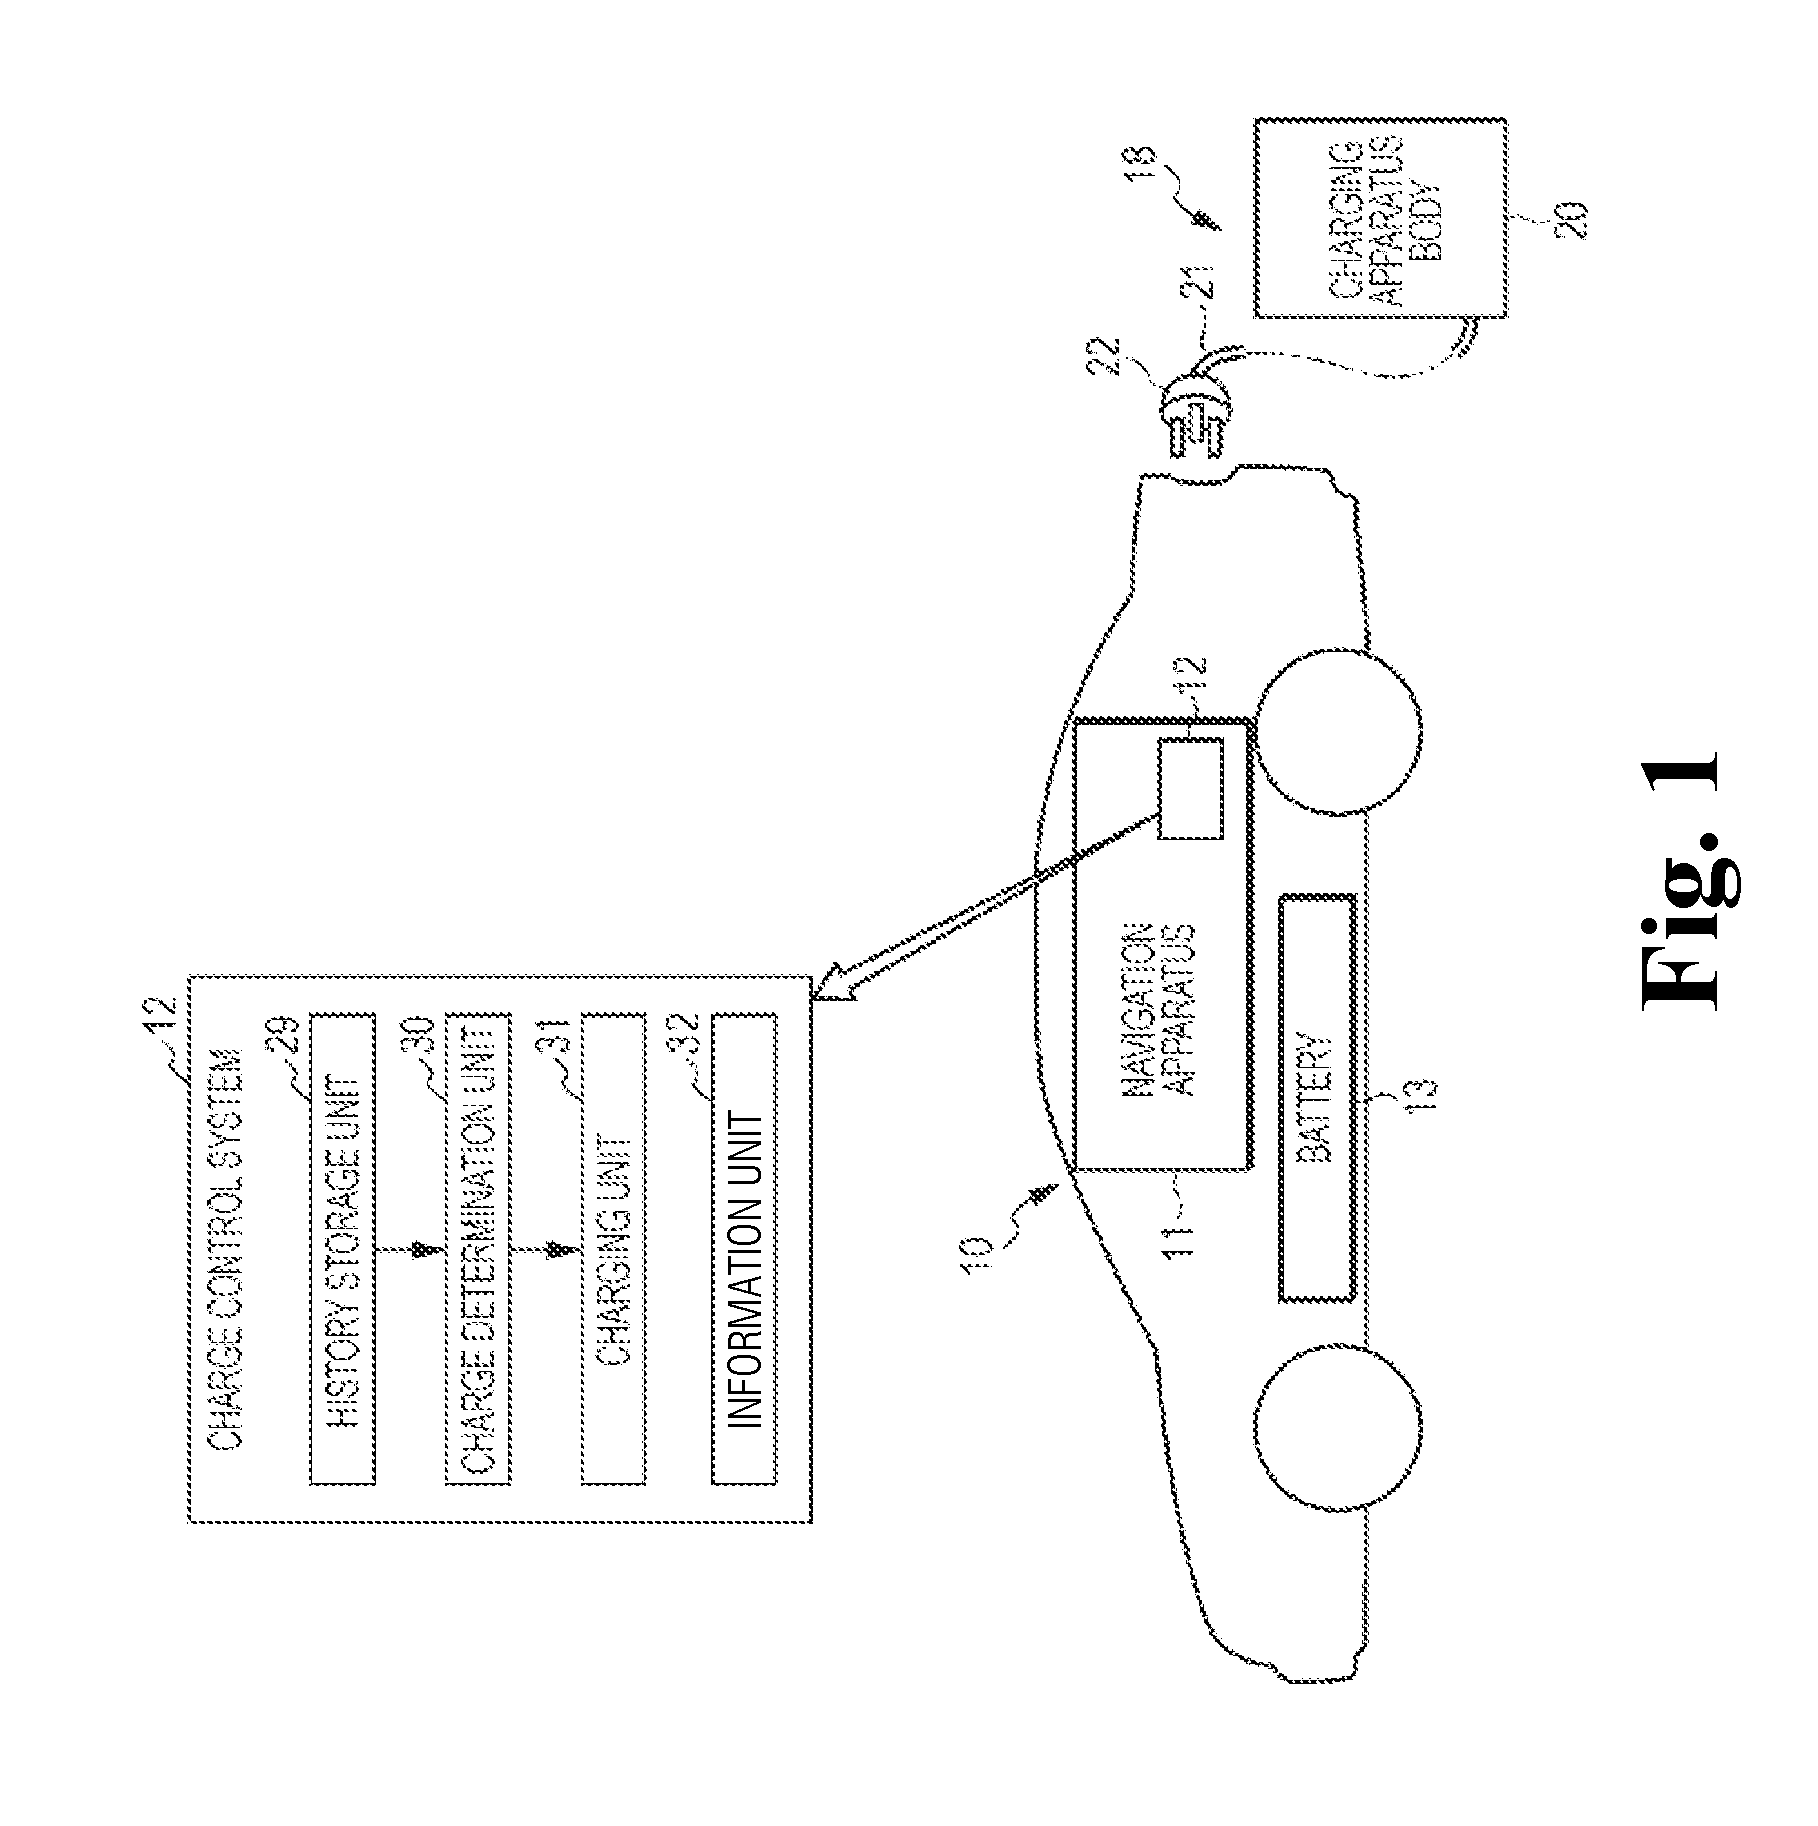 Electric vehicle charge control system